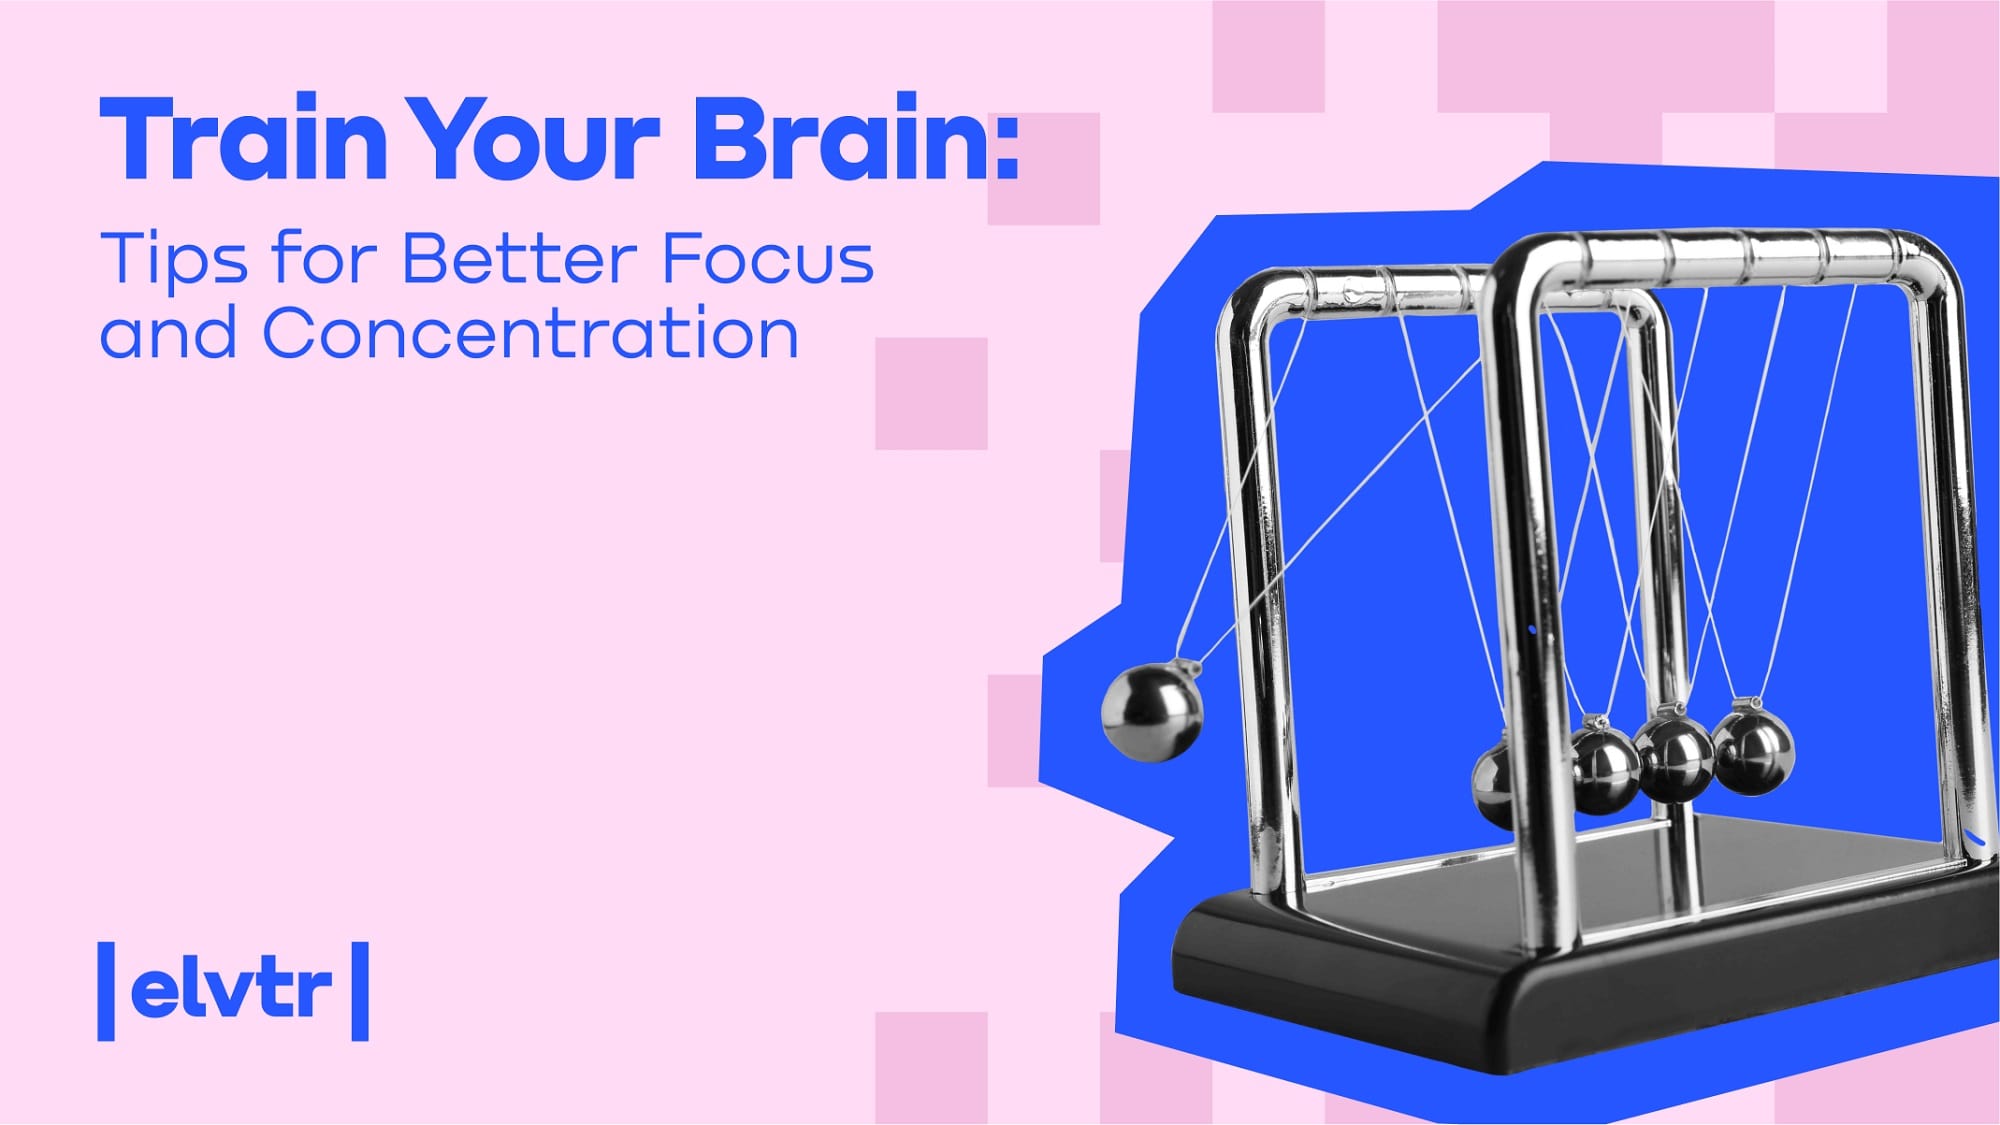 TRAIN YOUR BRAIN: TIPS FOR BETTER FOCUS AND CONCENTRATION image